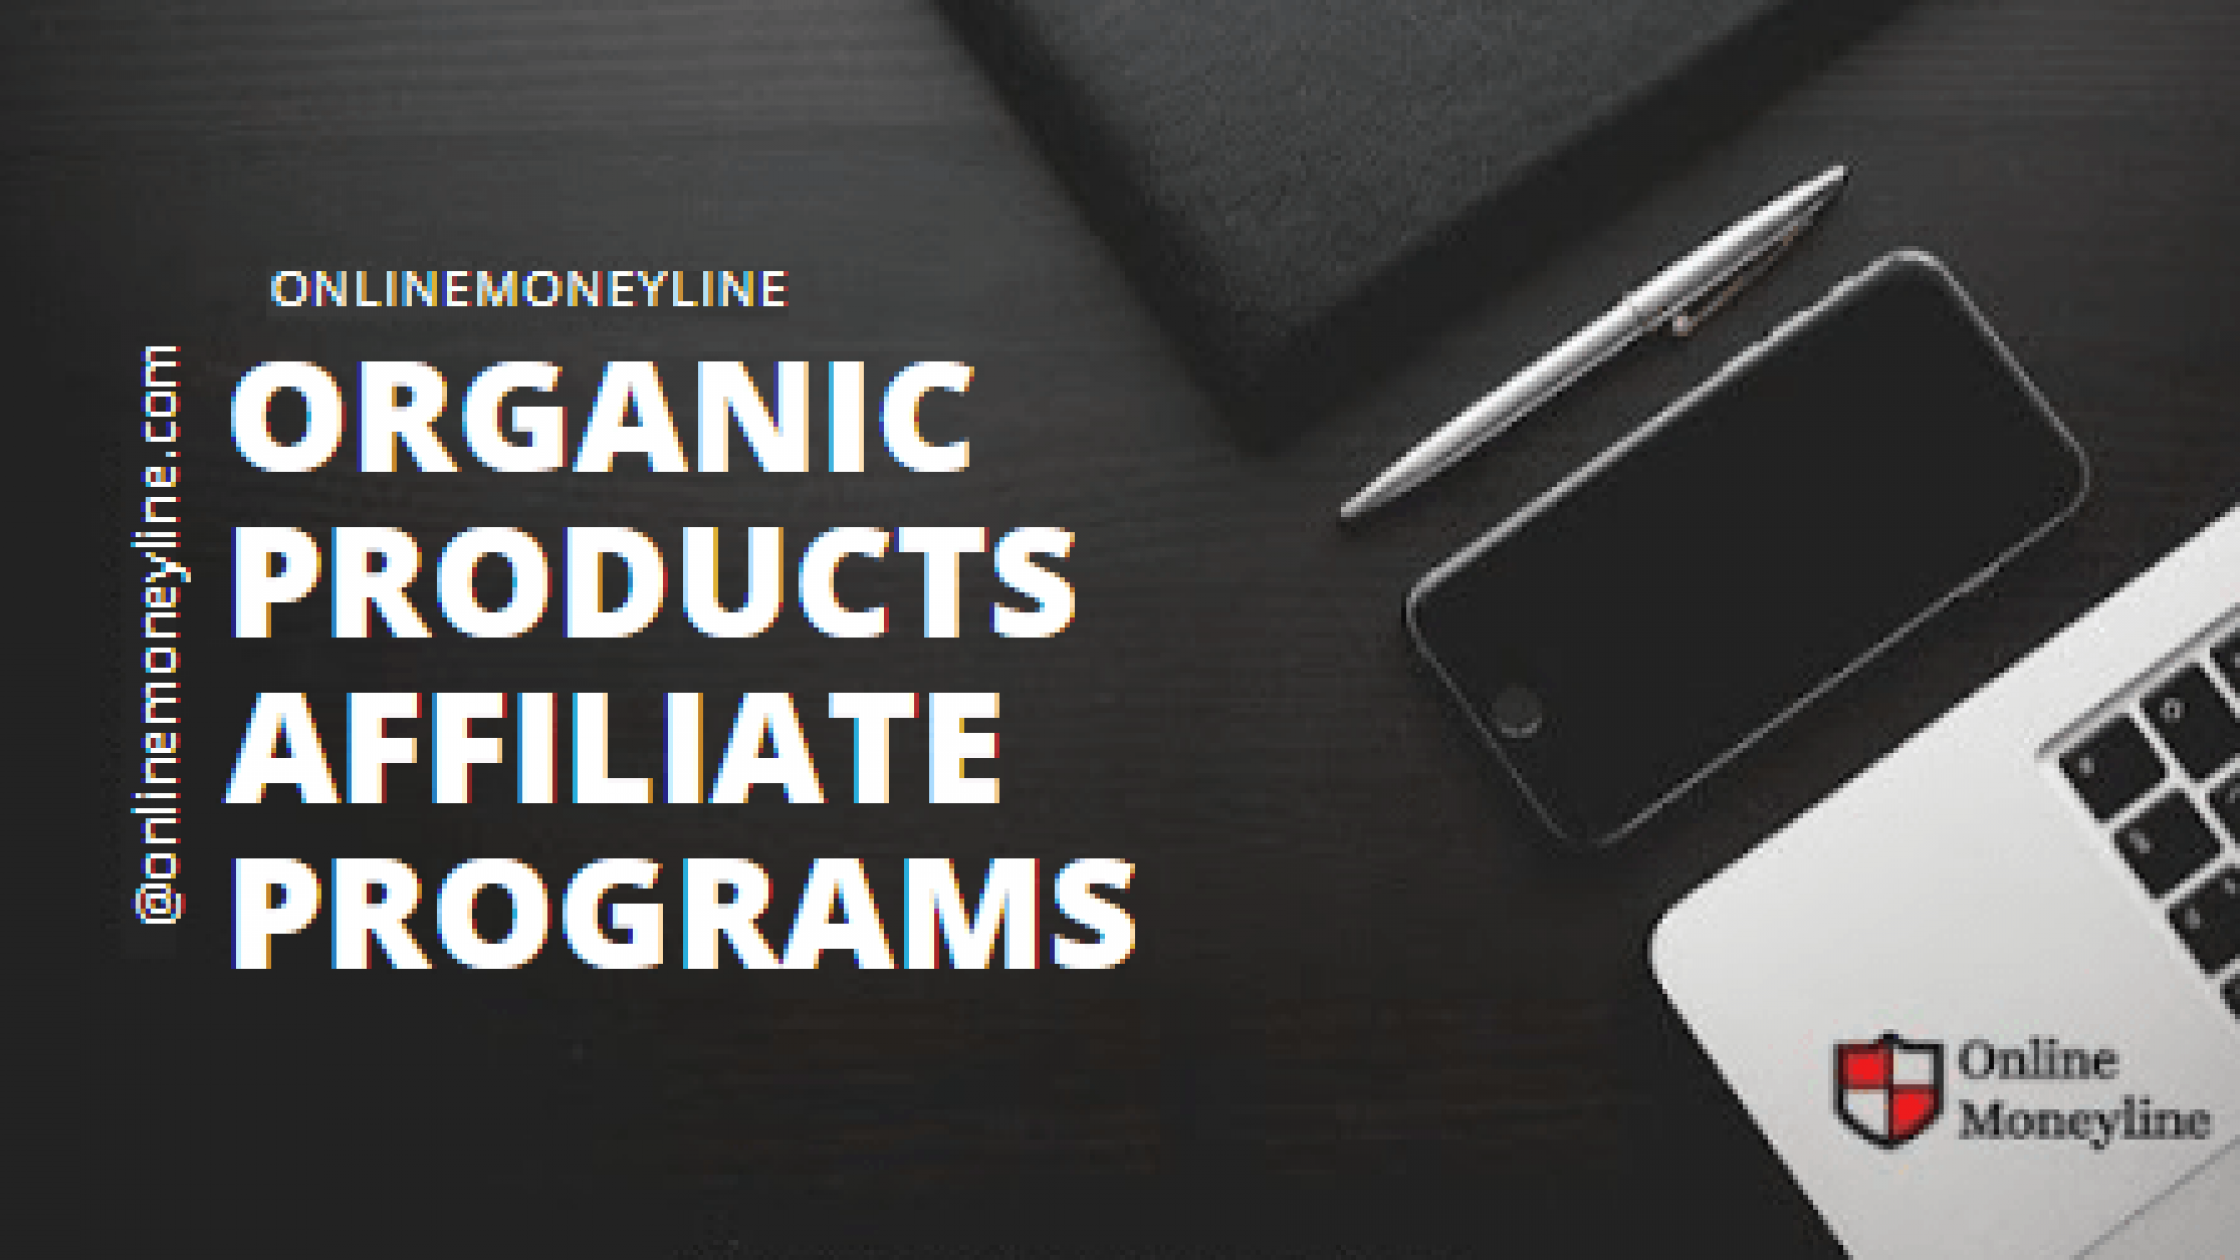 Organic Products Affiliate Programs 